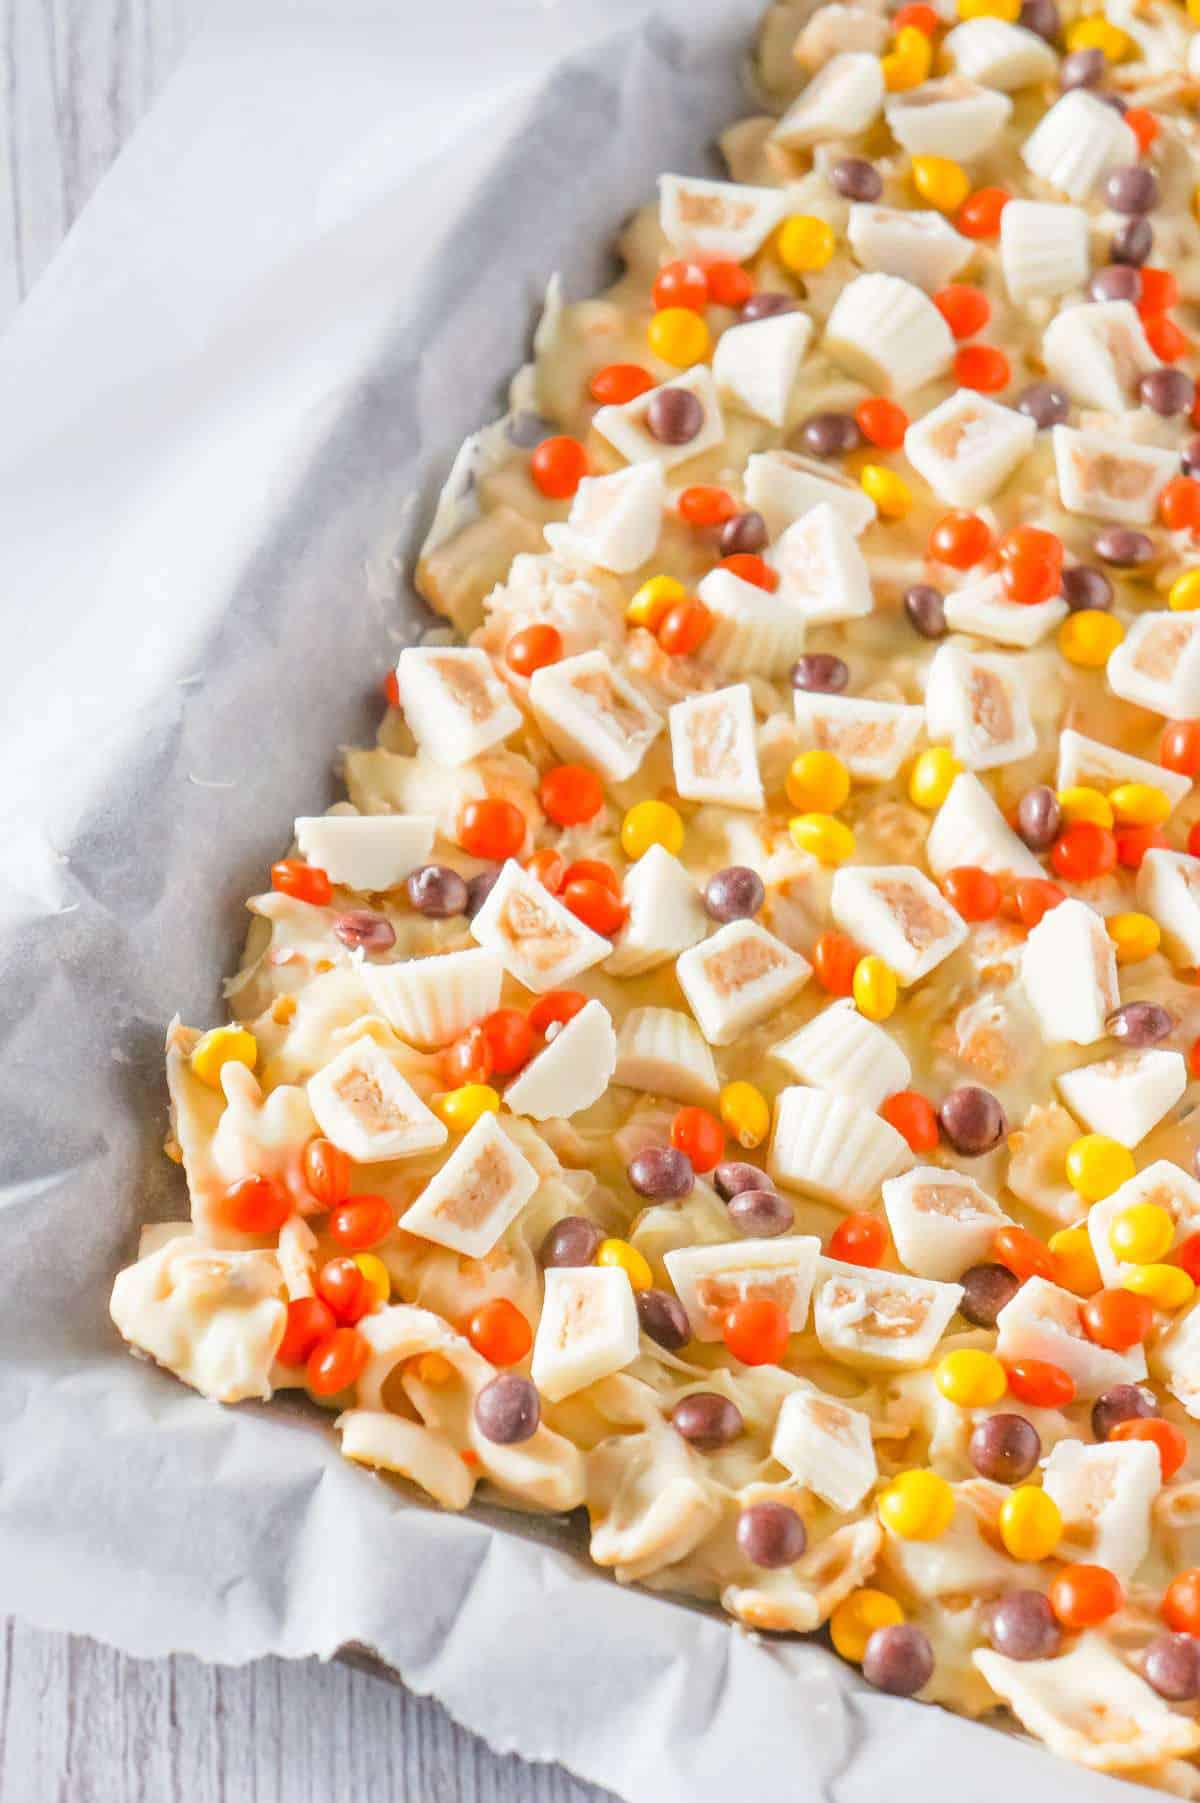 Fritos White Chocolate Peanut Butter Cup Bark is a sweet and salty dessert recipe made with white chocolate chips, Fritos corn chips, mini white chocolate Reese's peanut butter cups and mini Reese's pieces.